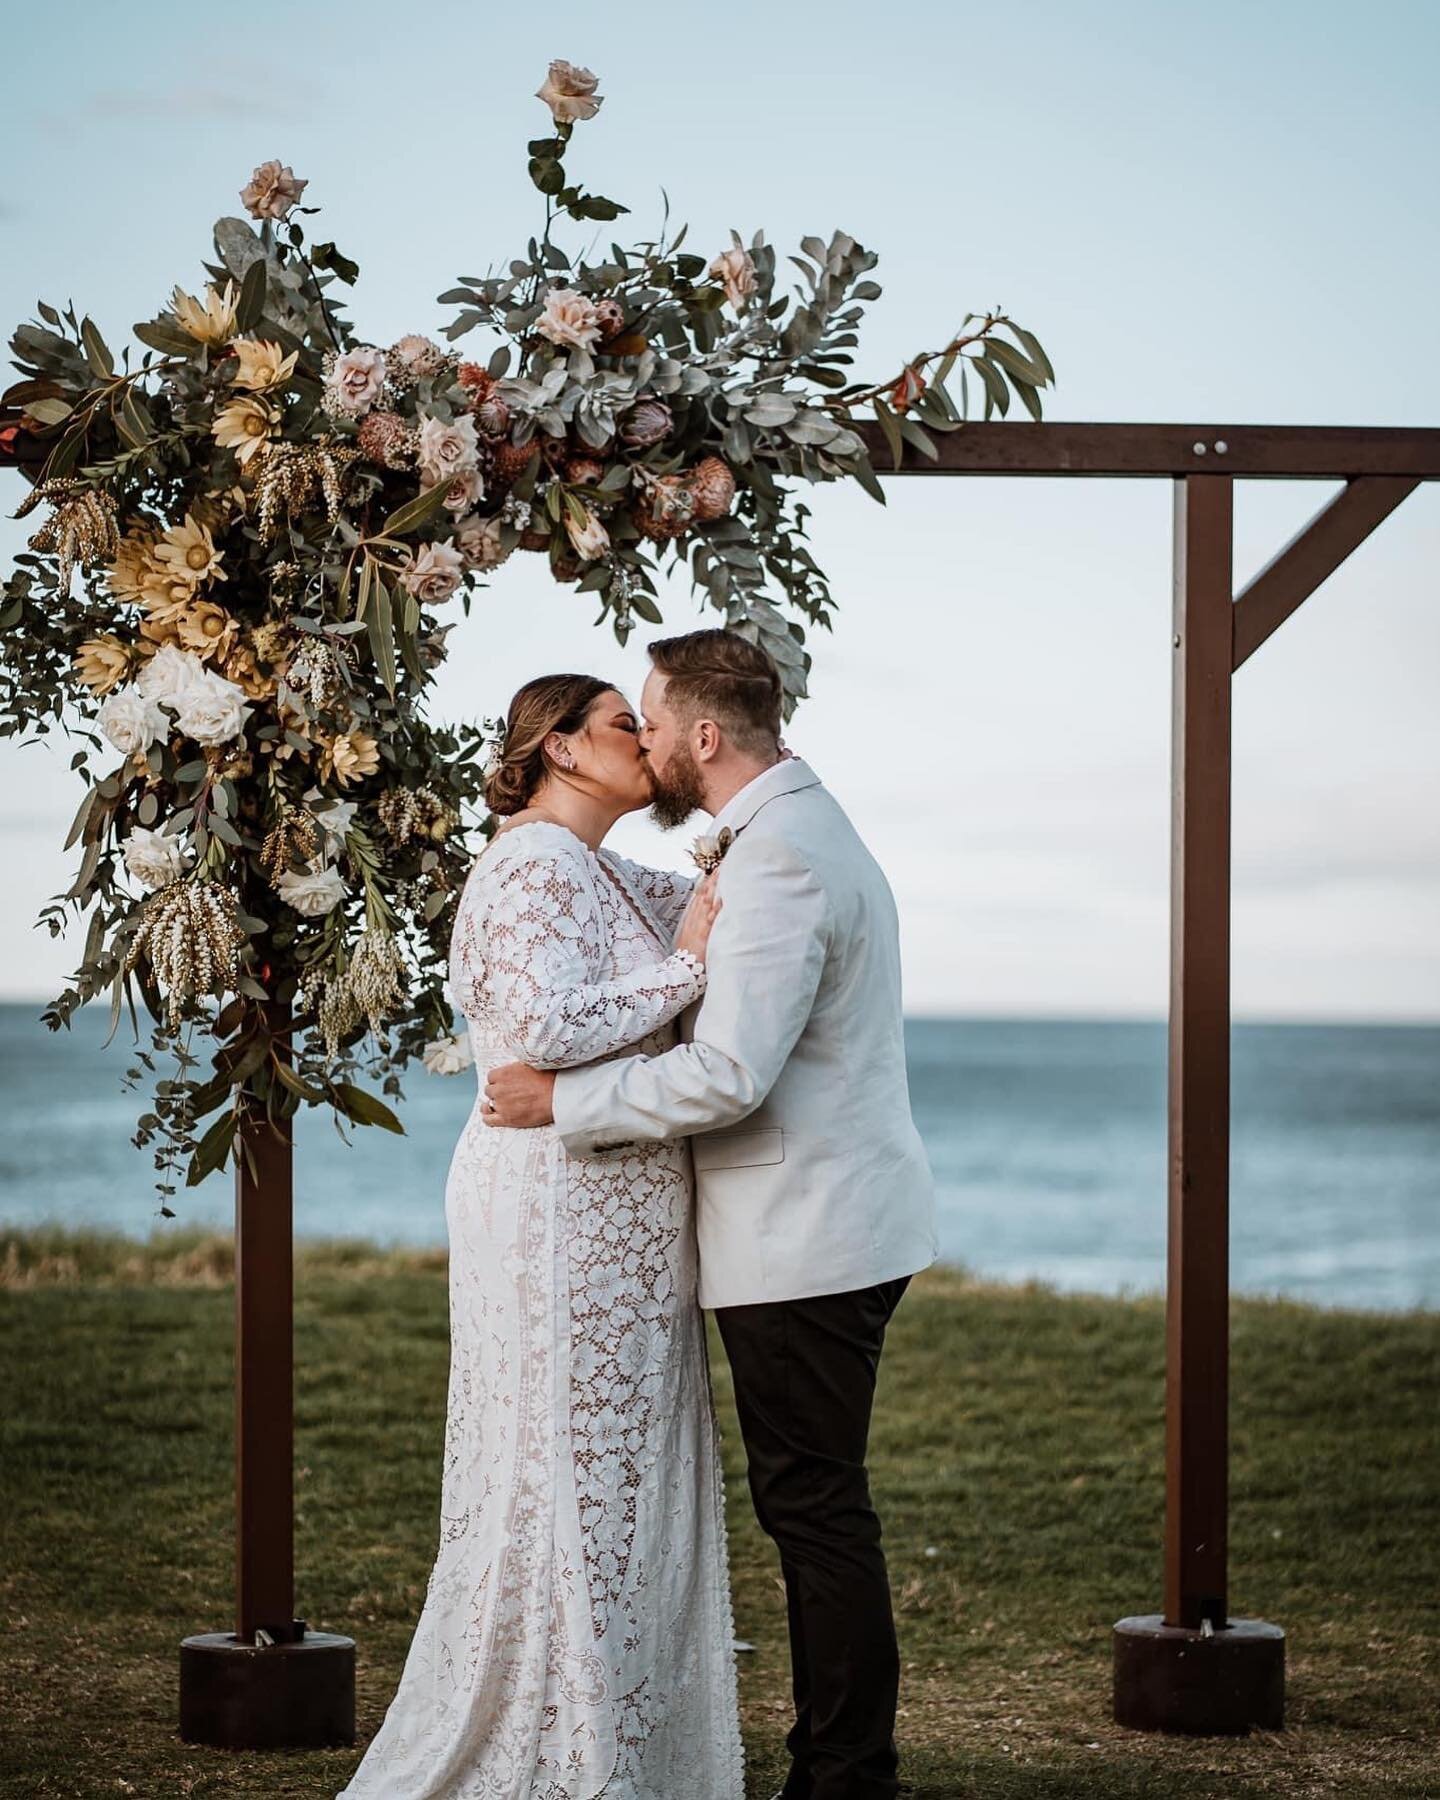 A sneaky peak of our large, statement arbour piece from Claire and Kial&rsquo;s wedding a couple of week&rsquo;s back on a beautiful winter afternoon 

Claire gave me a lot of creative freedom and put her trust in me to work some floral magic. It was